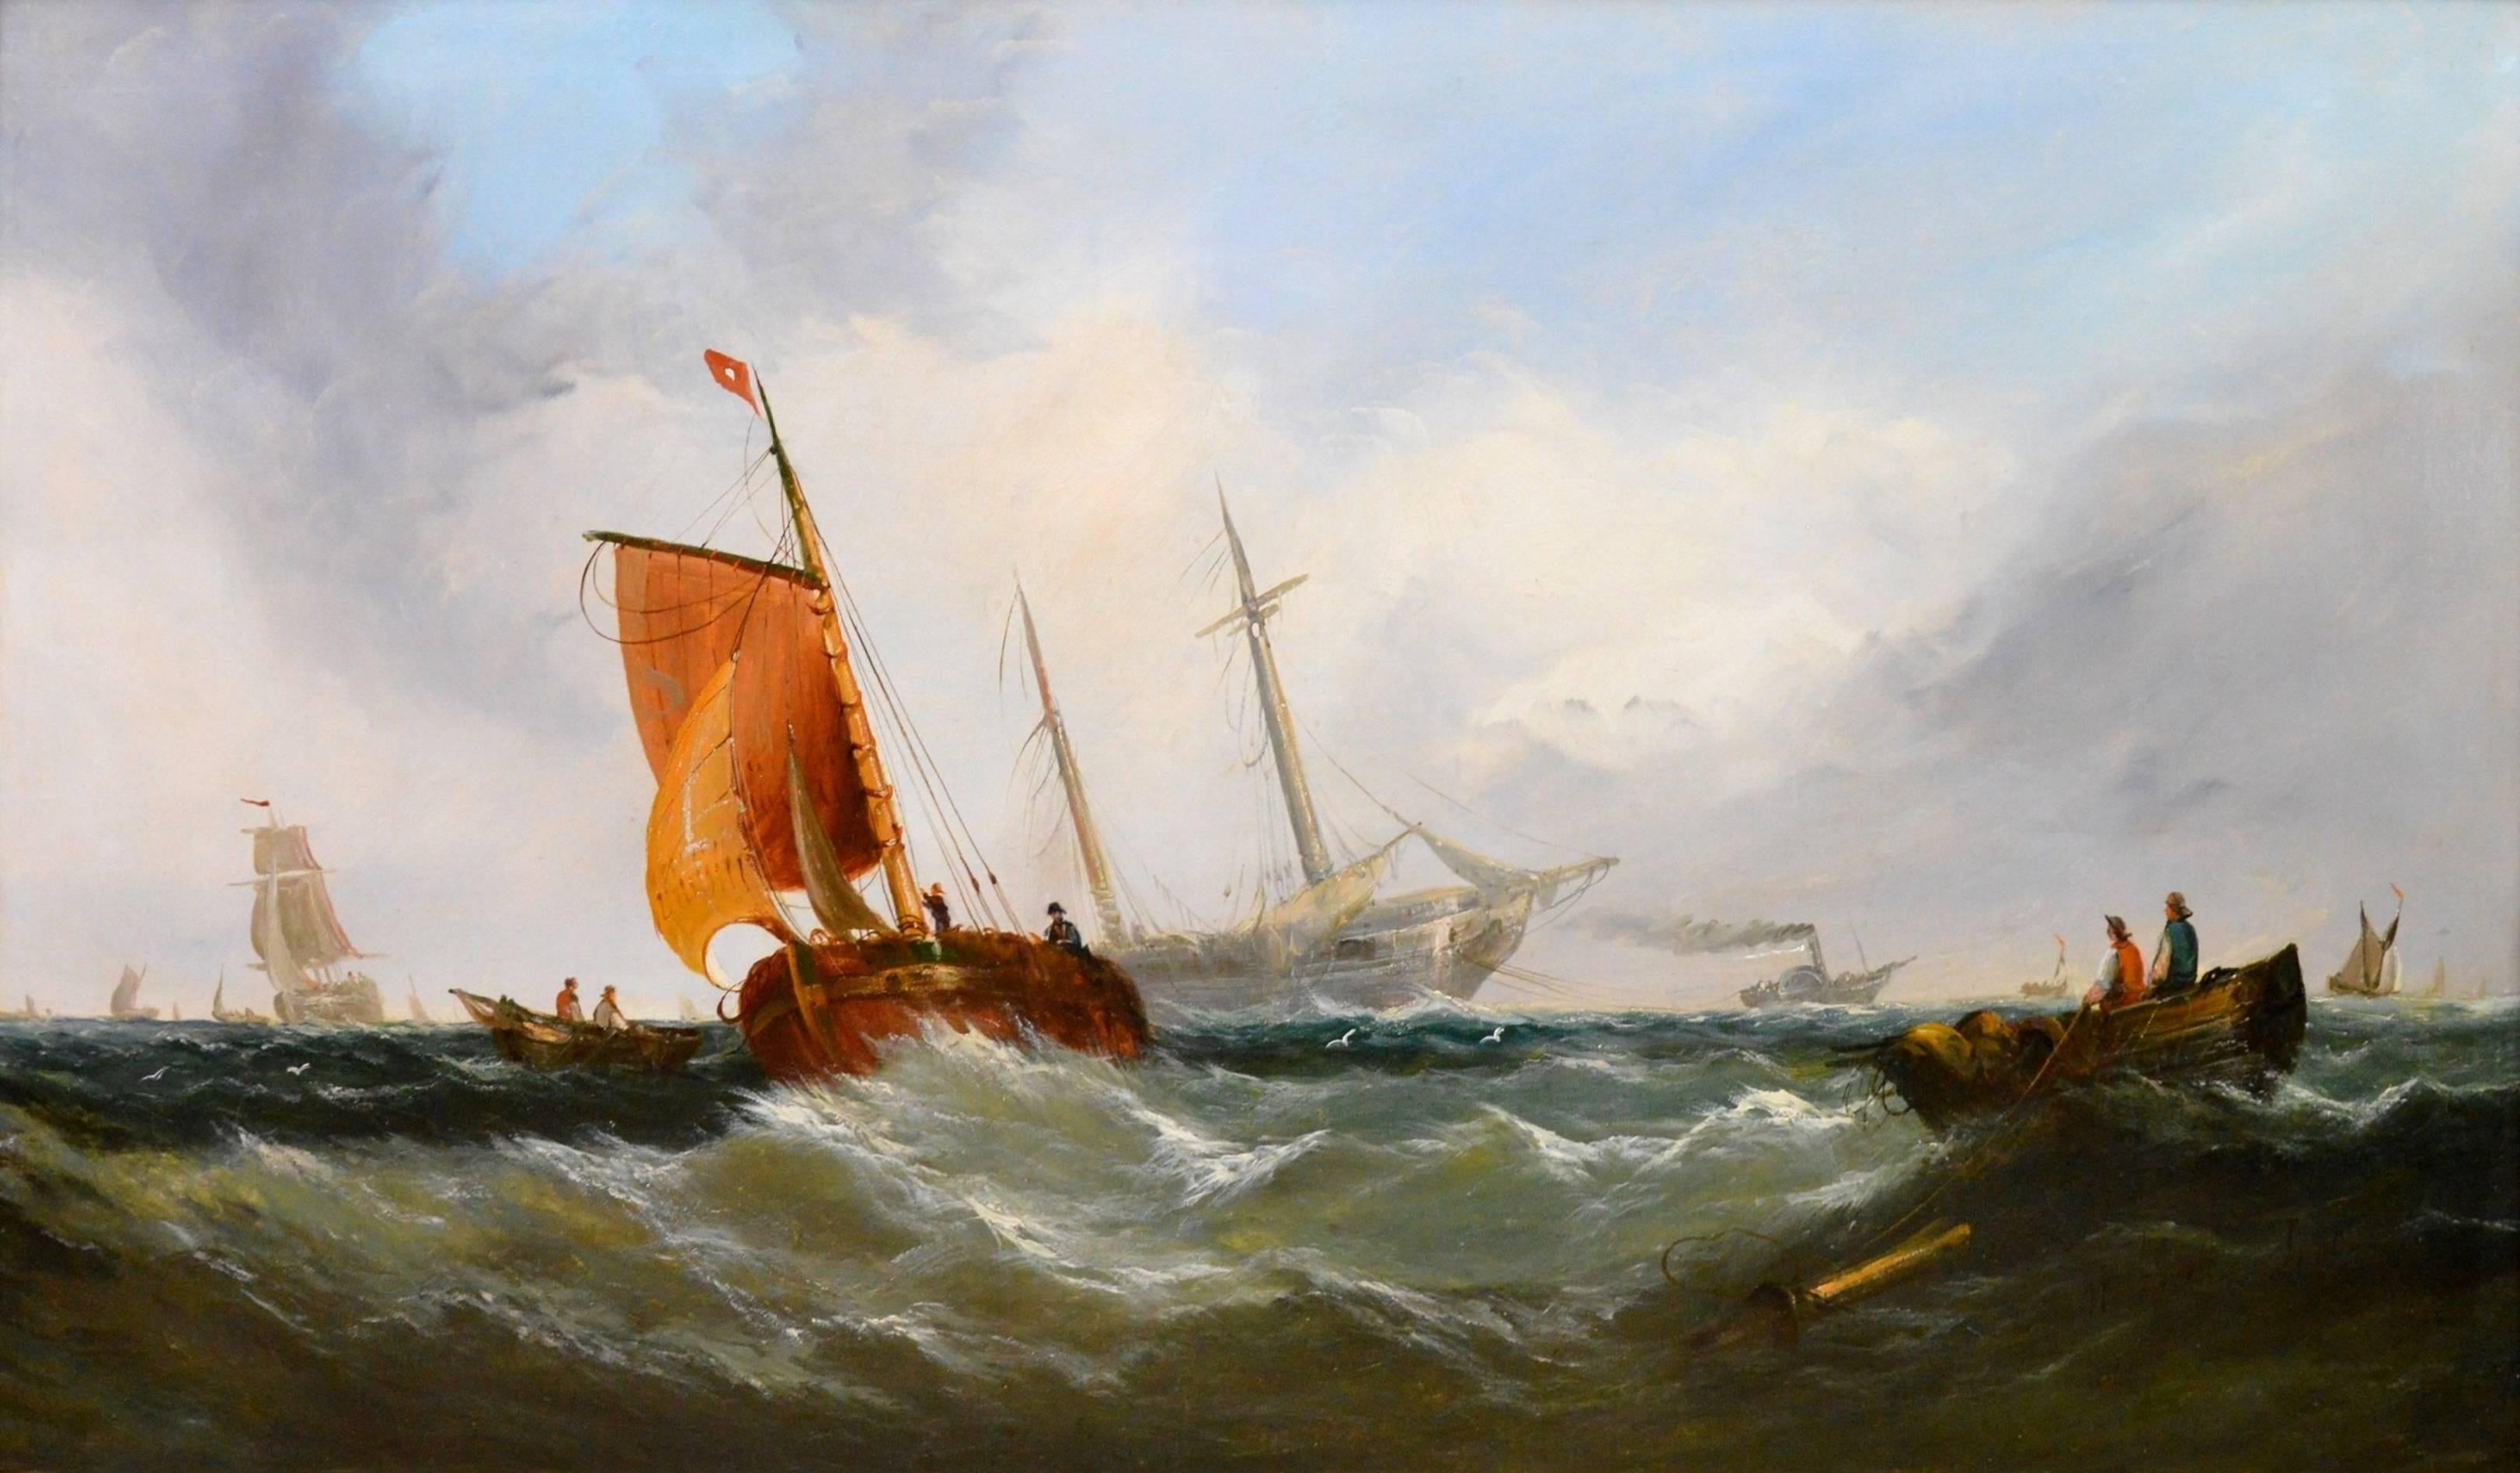 On the Medway - Exhibited at the Royal Academy in 1864 - Victorian Painting by William Adolphus Knell